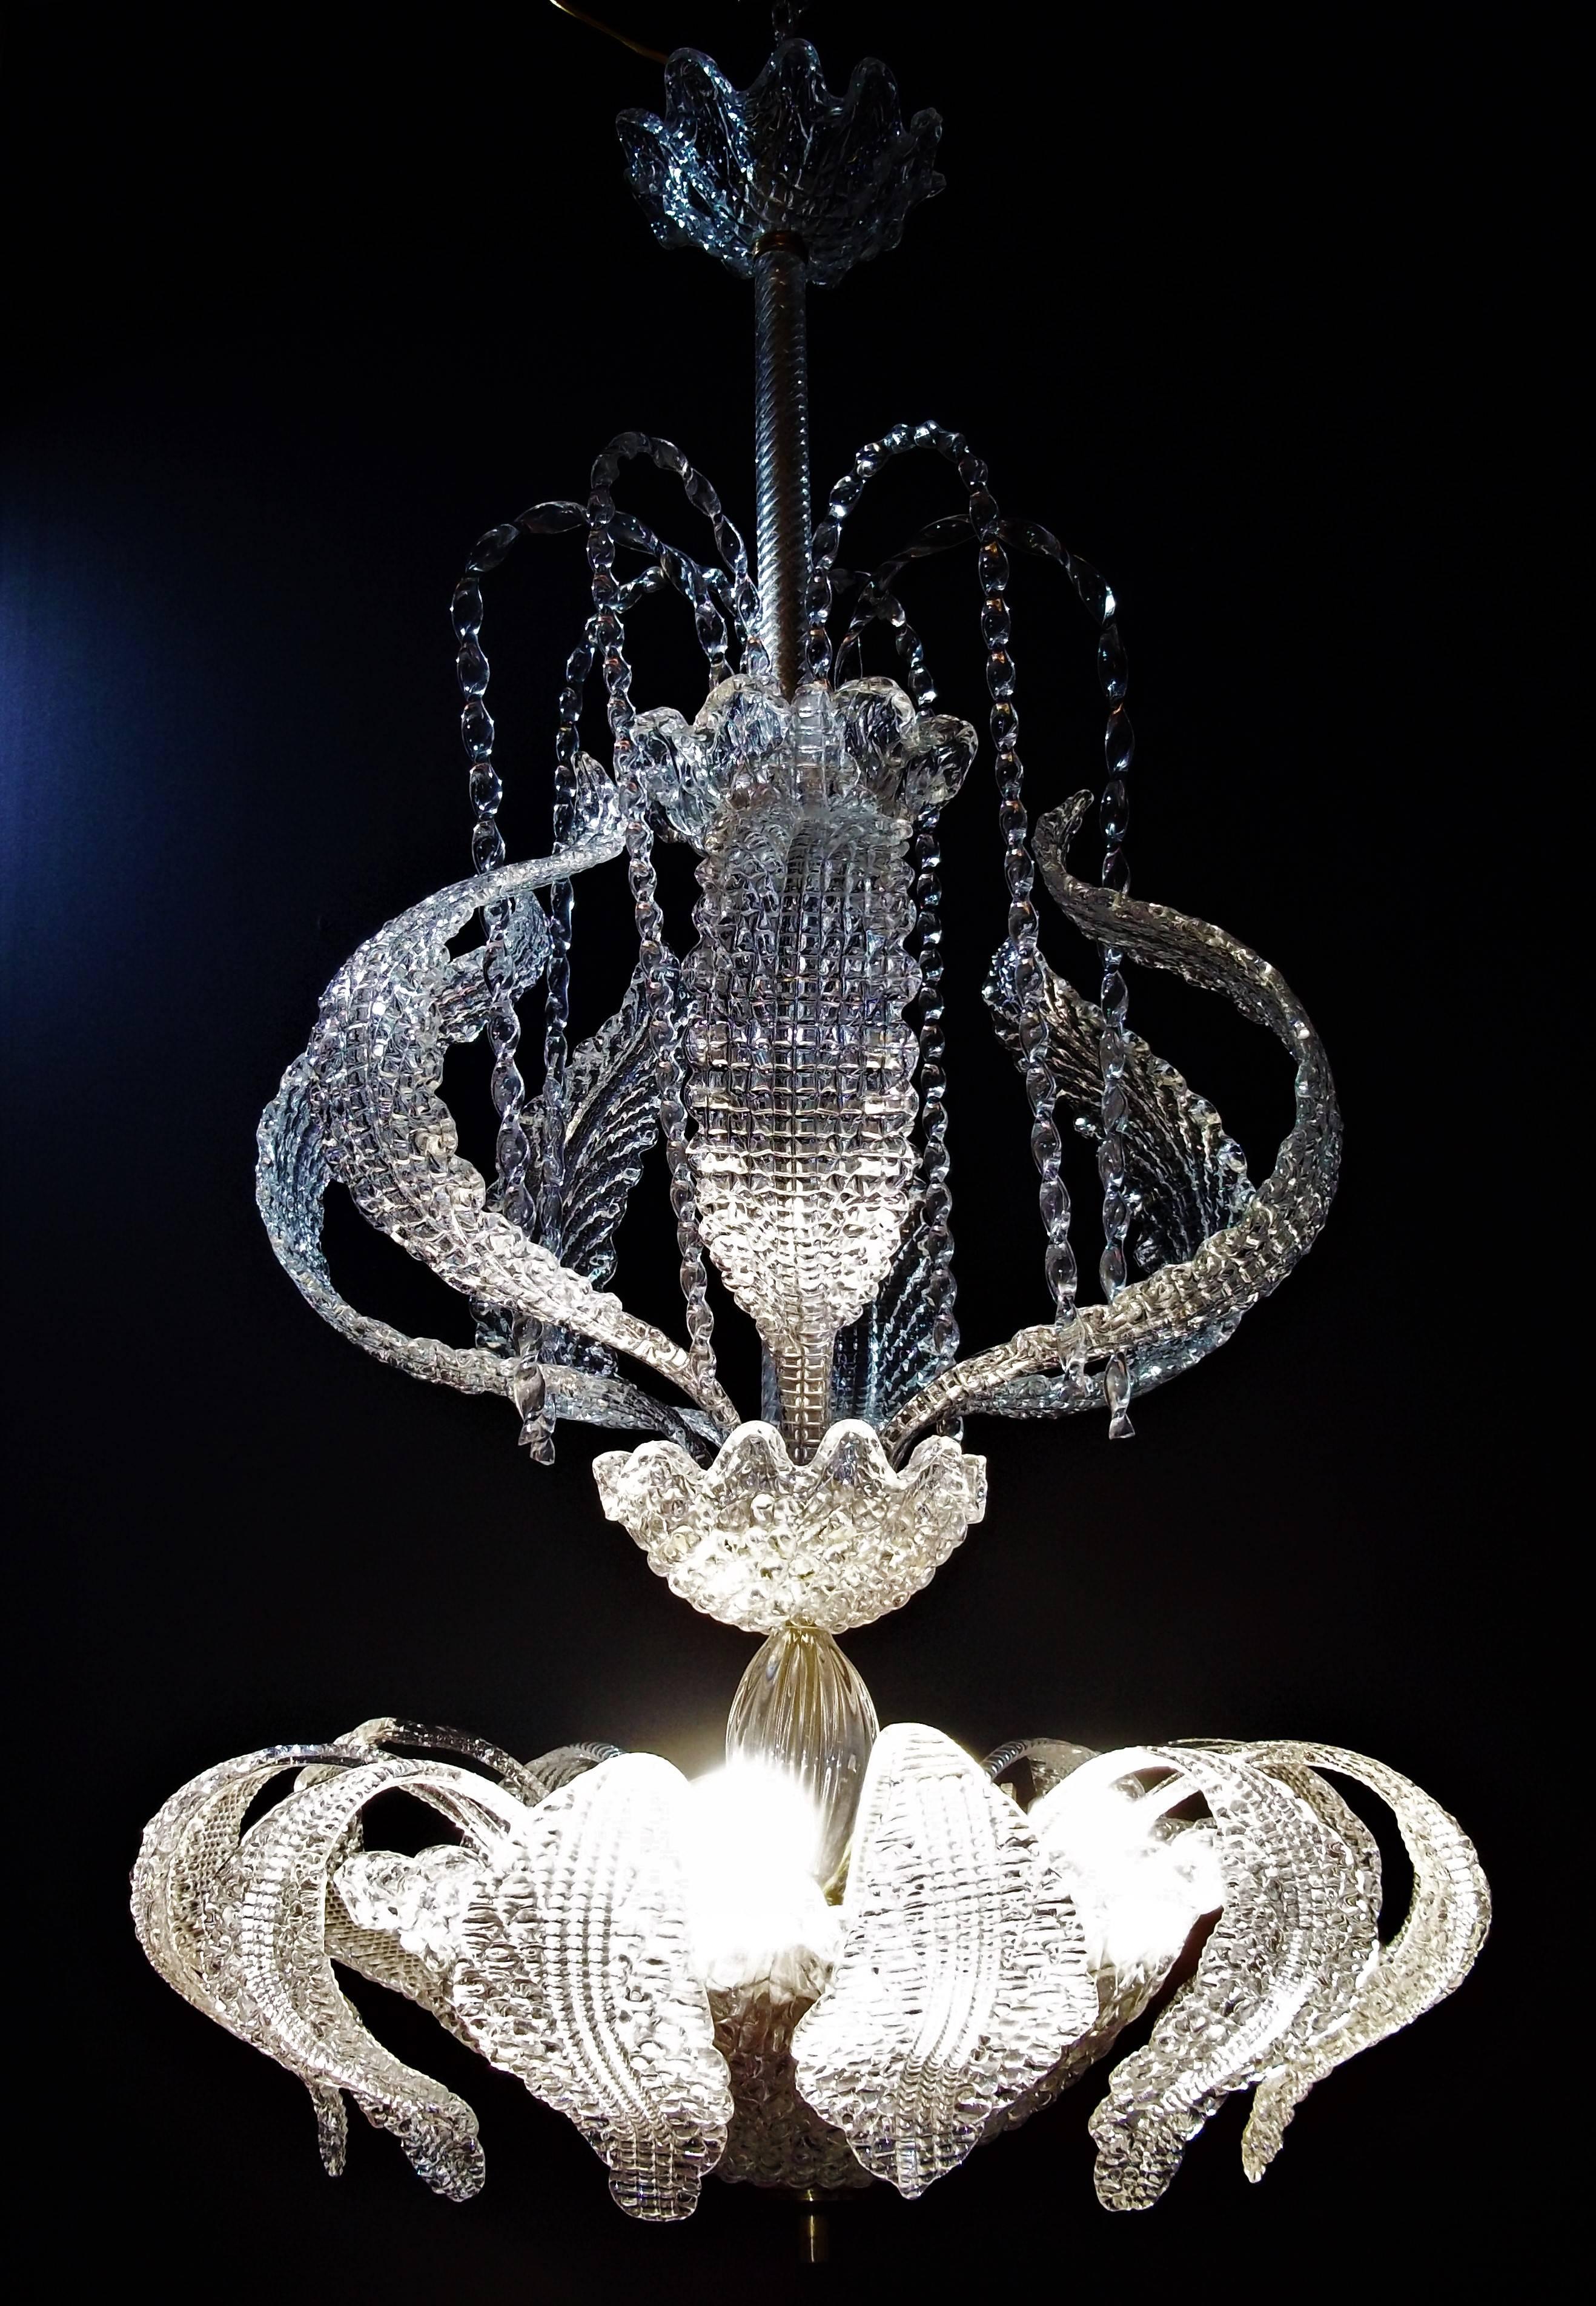 Unusual Mid-Century Modern chandelier in Murano glass attributed to Barovier & Toso.